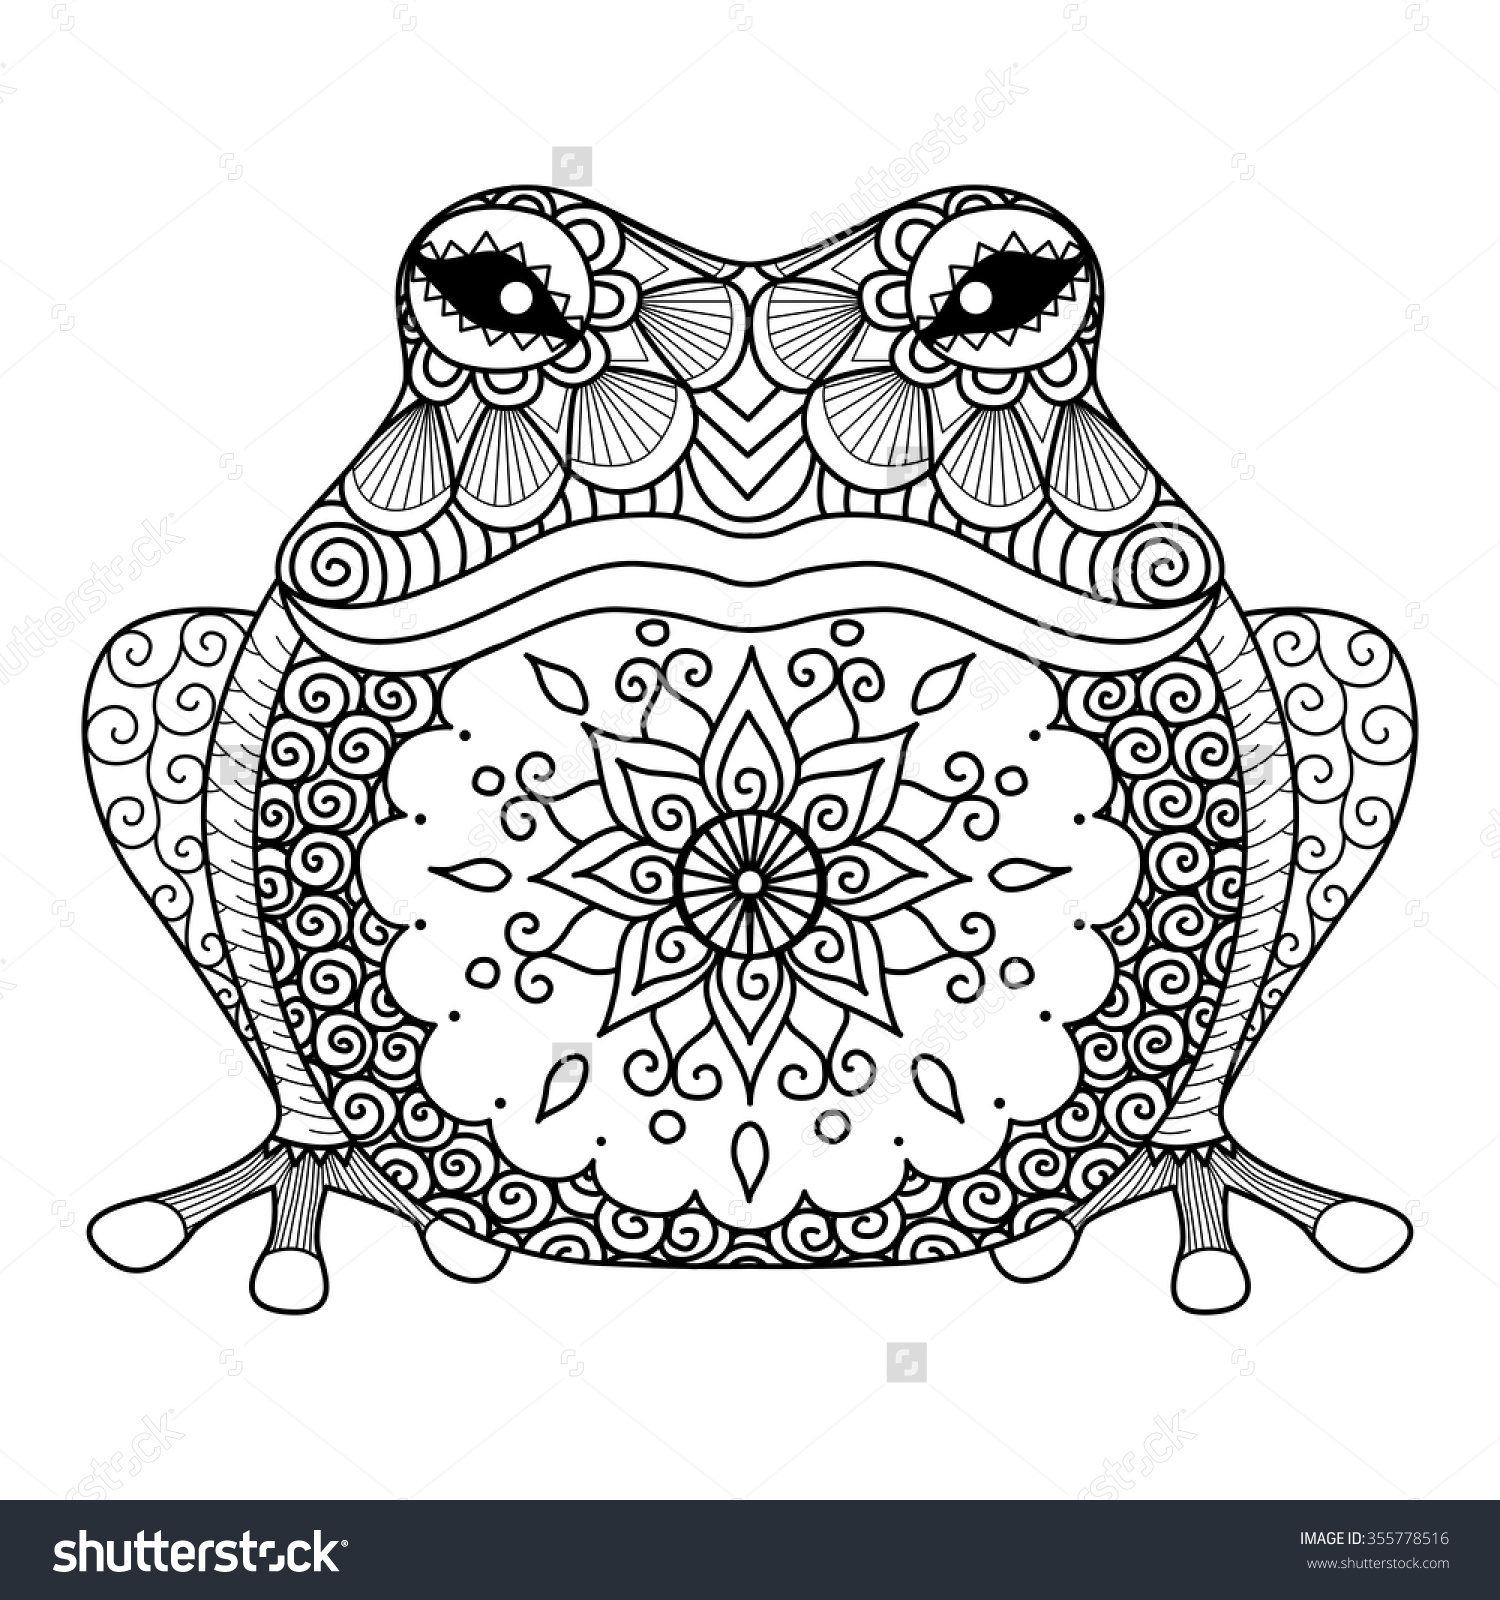 Magnificent Tree Frog coloring #7, Download drawings